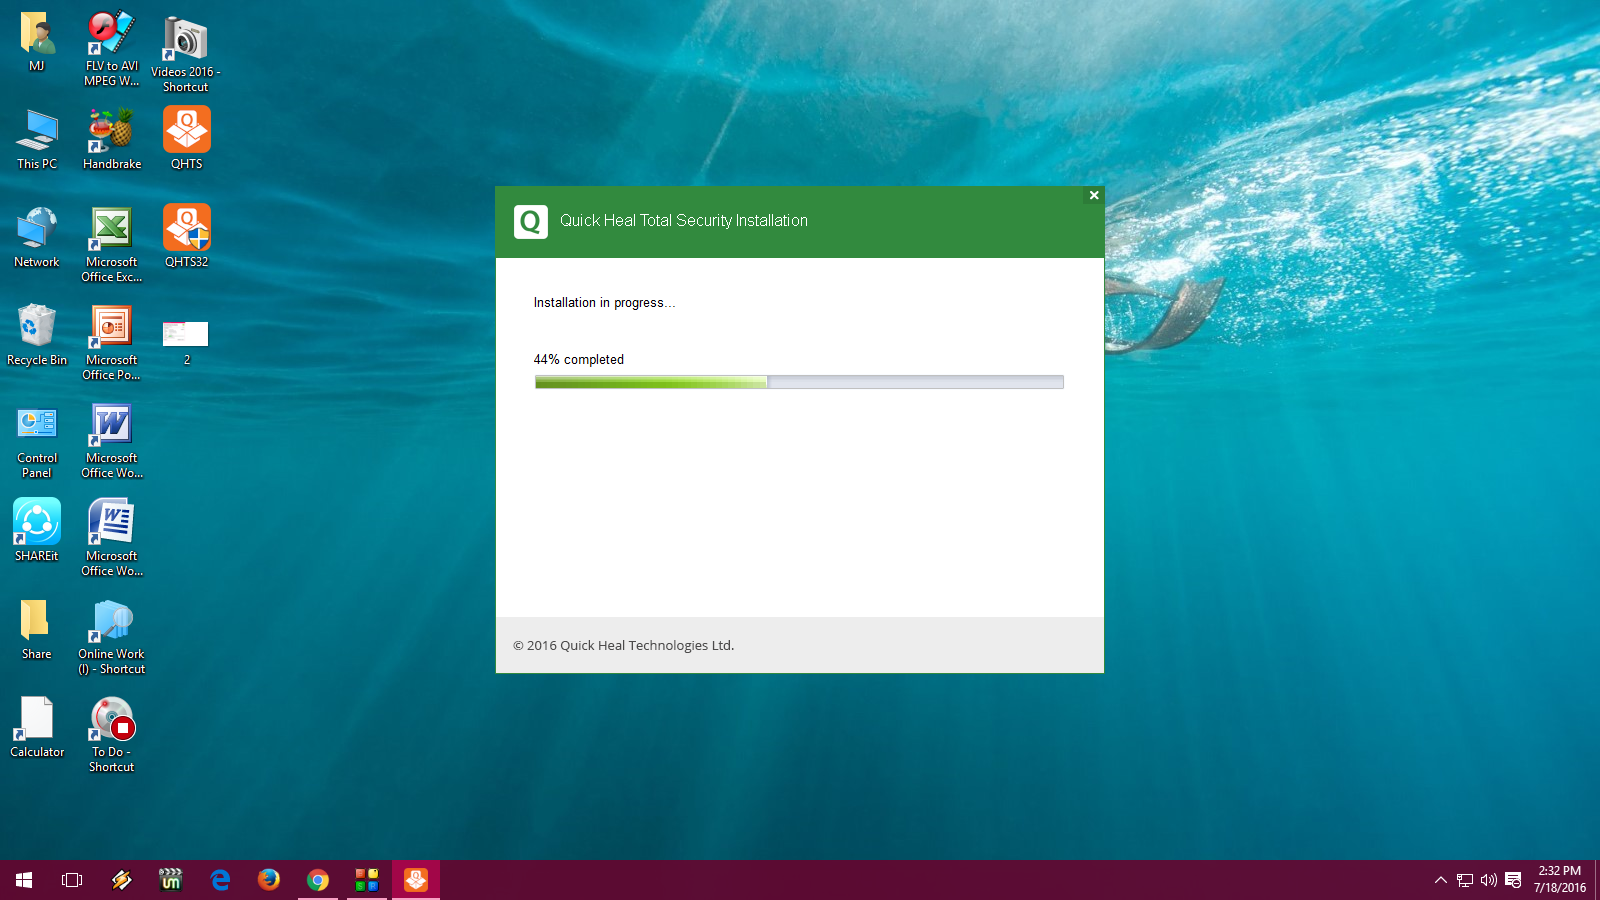 How to Install Quick Heal Antivirus in Windows 10 (Easy Steps)